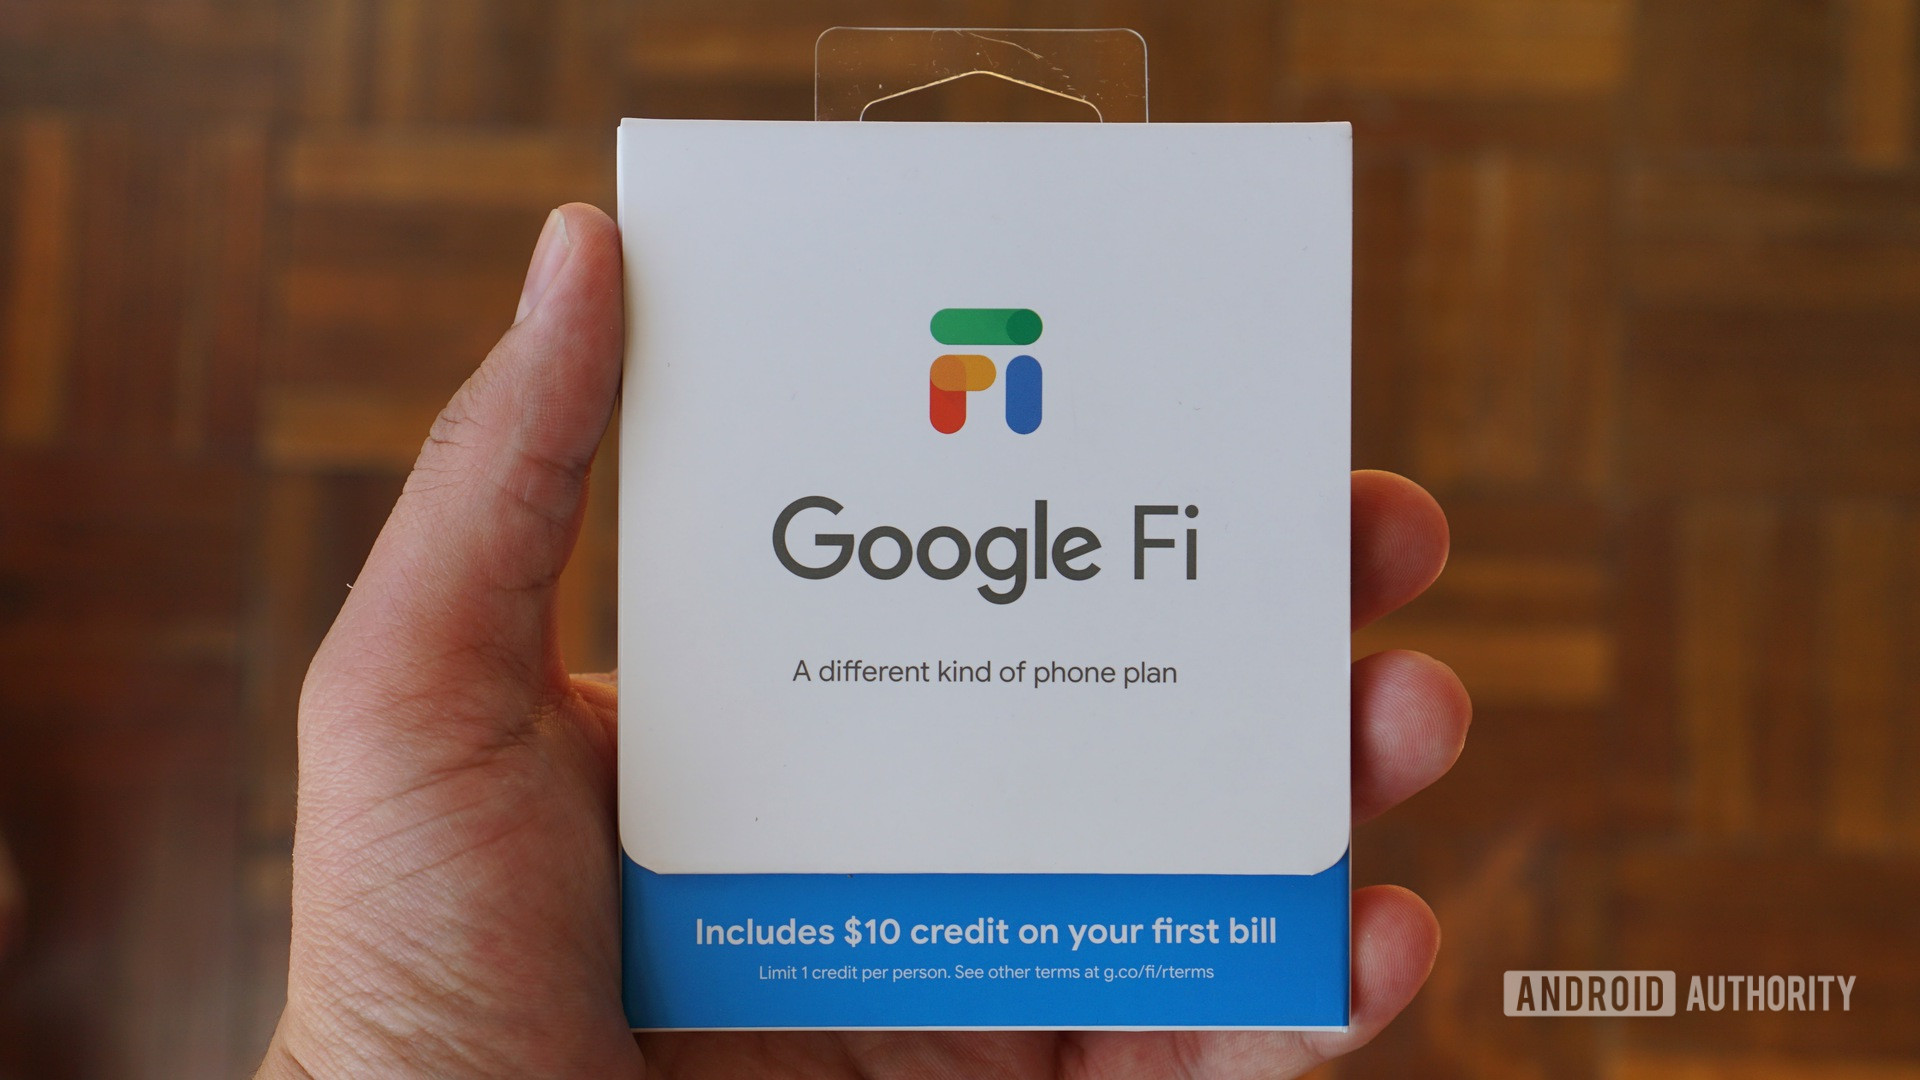 The Google Fi packaging.